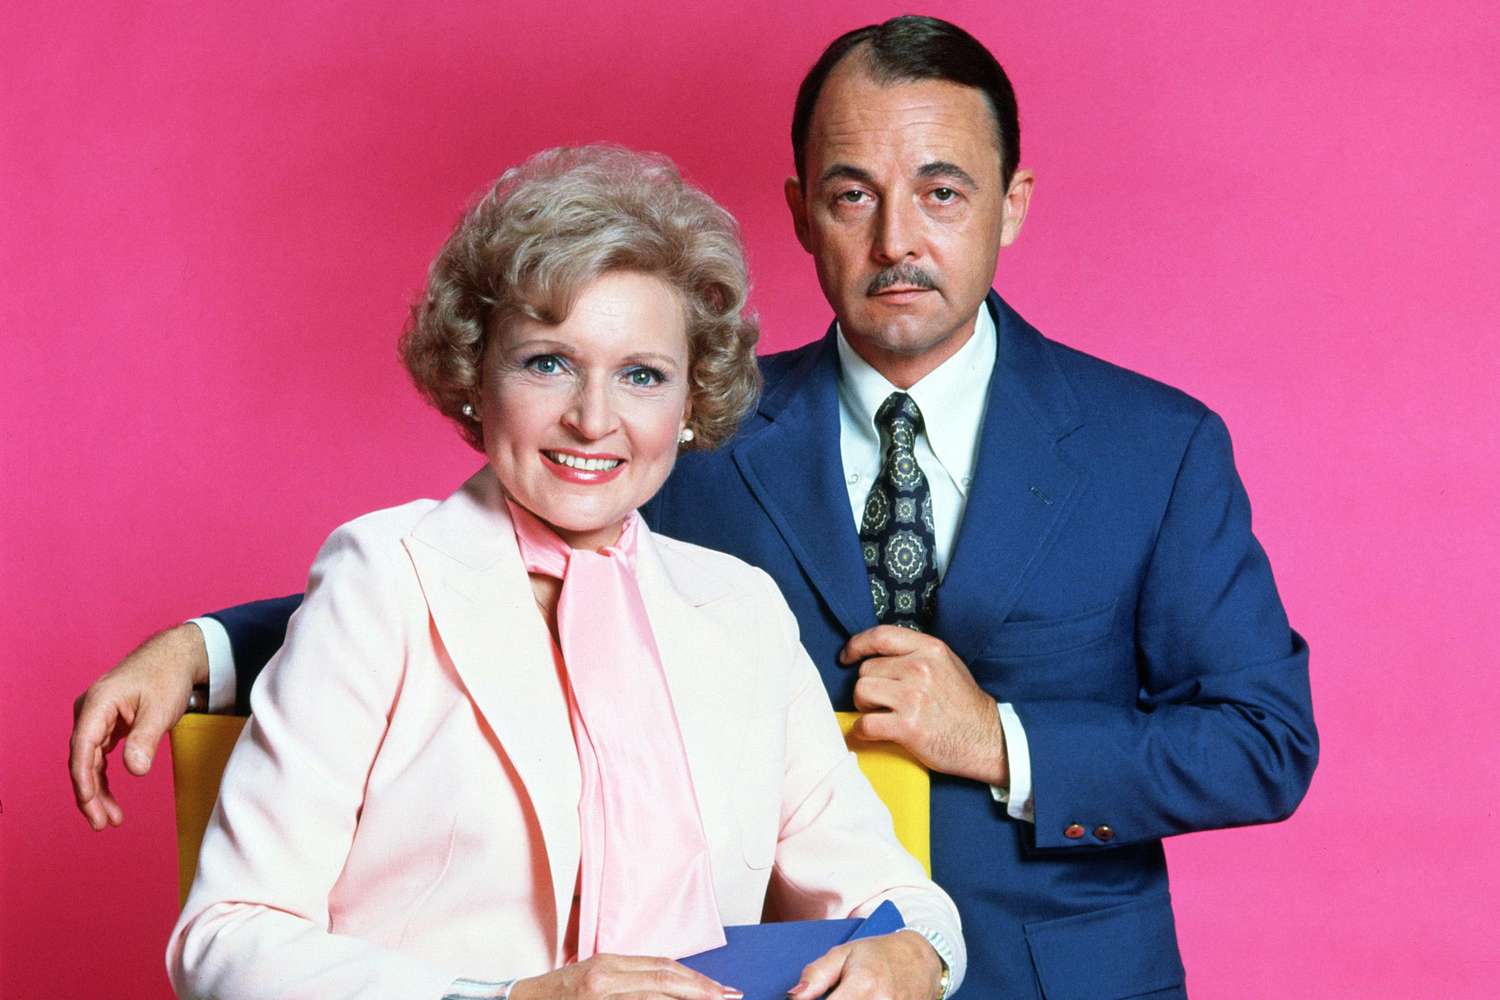 The Betty White Show (1977-78)